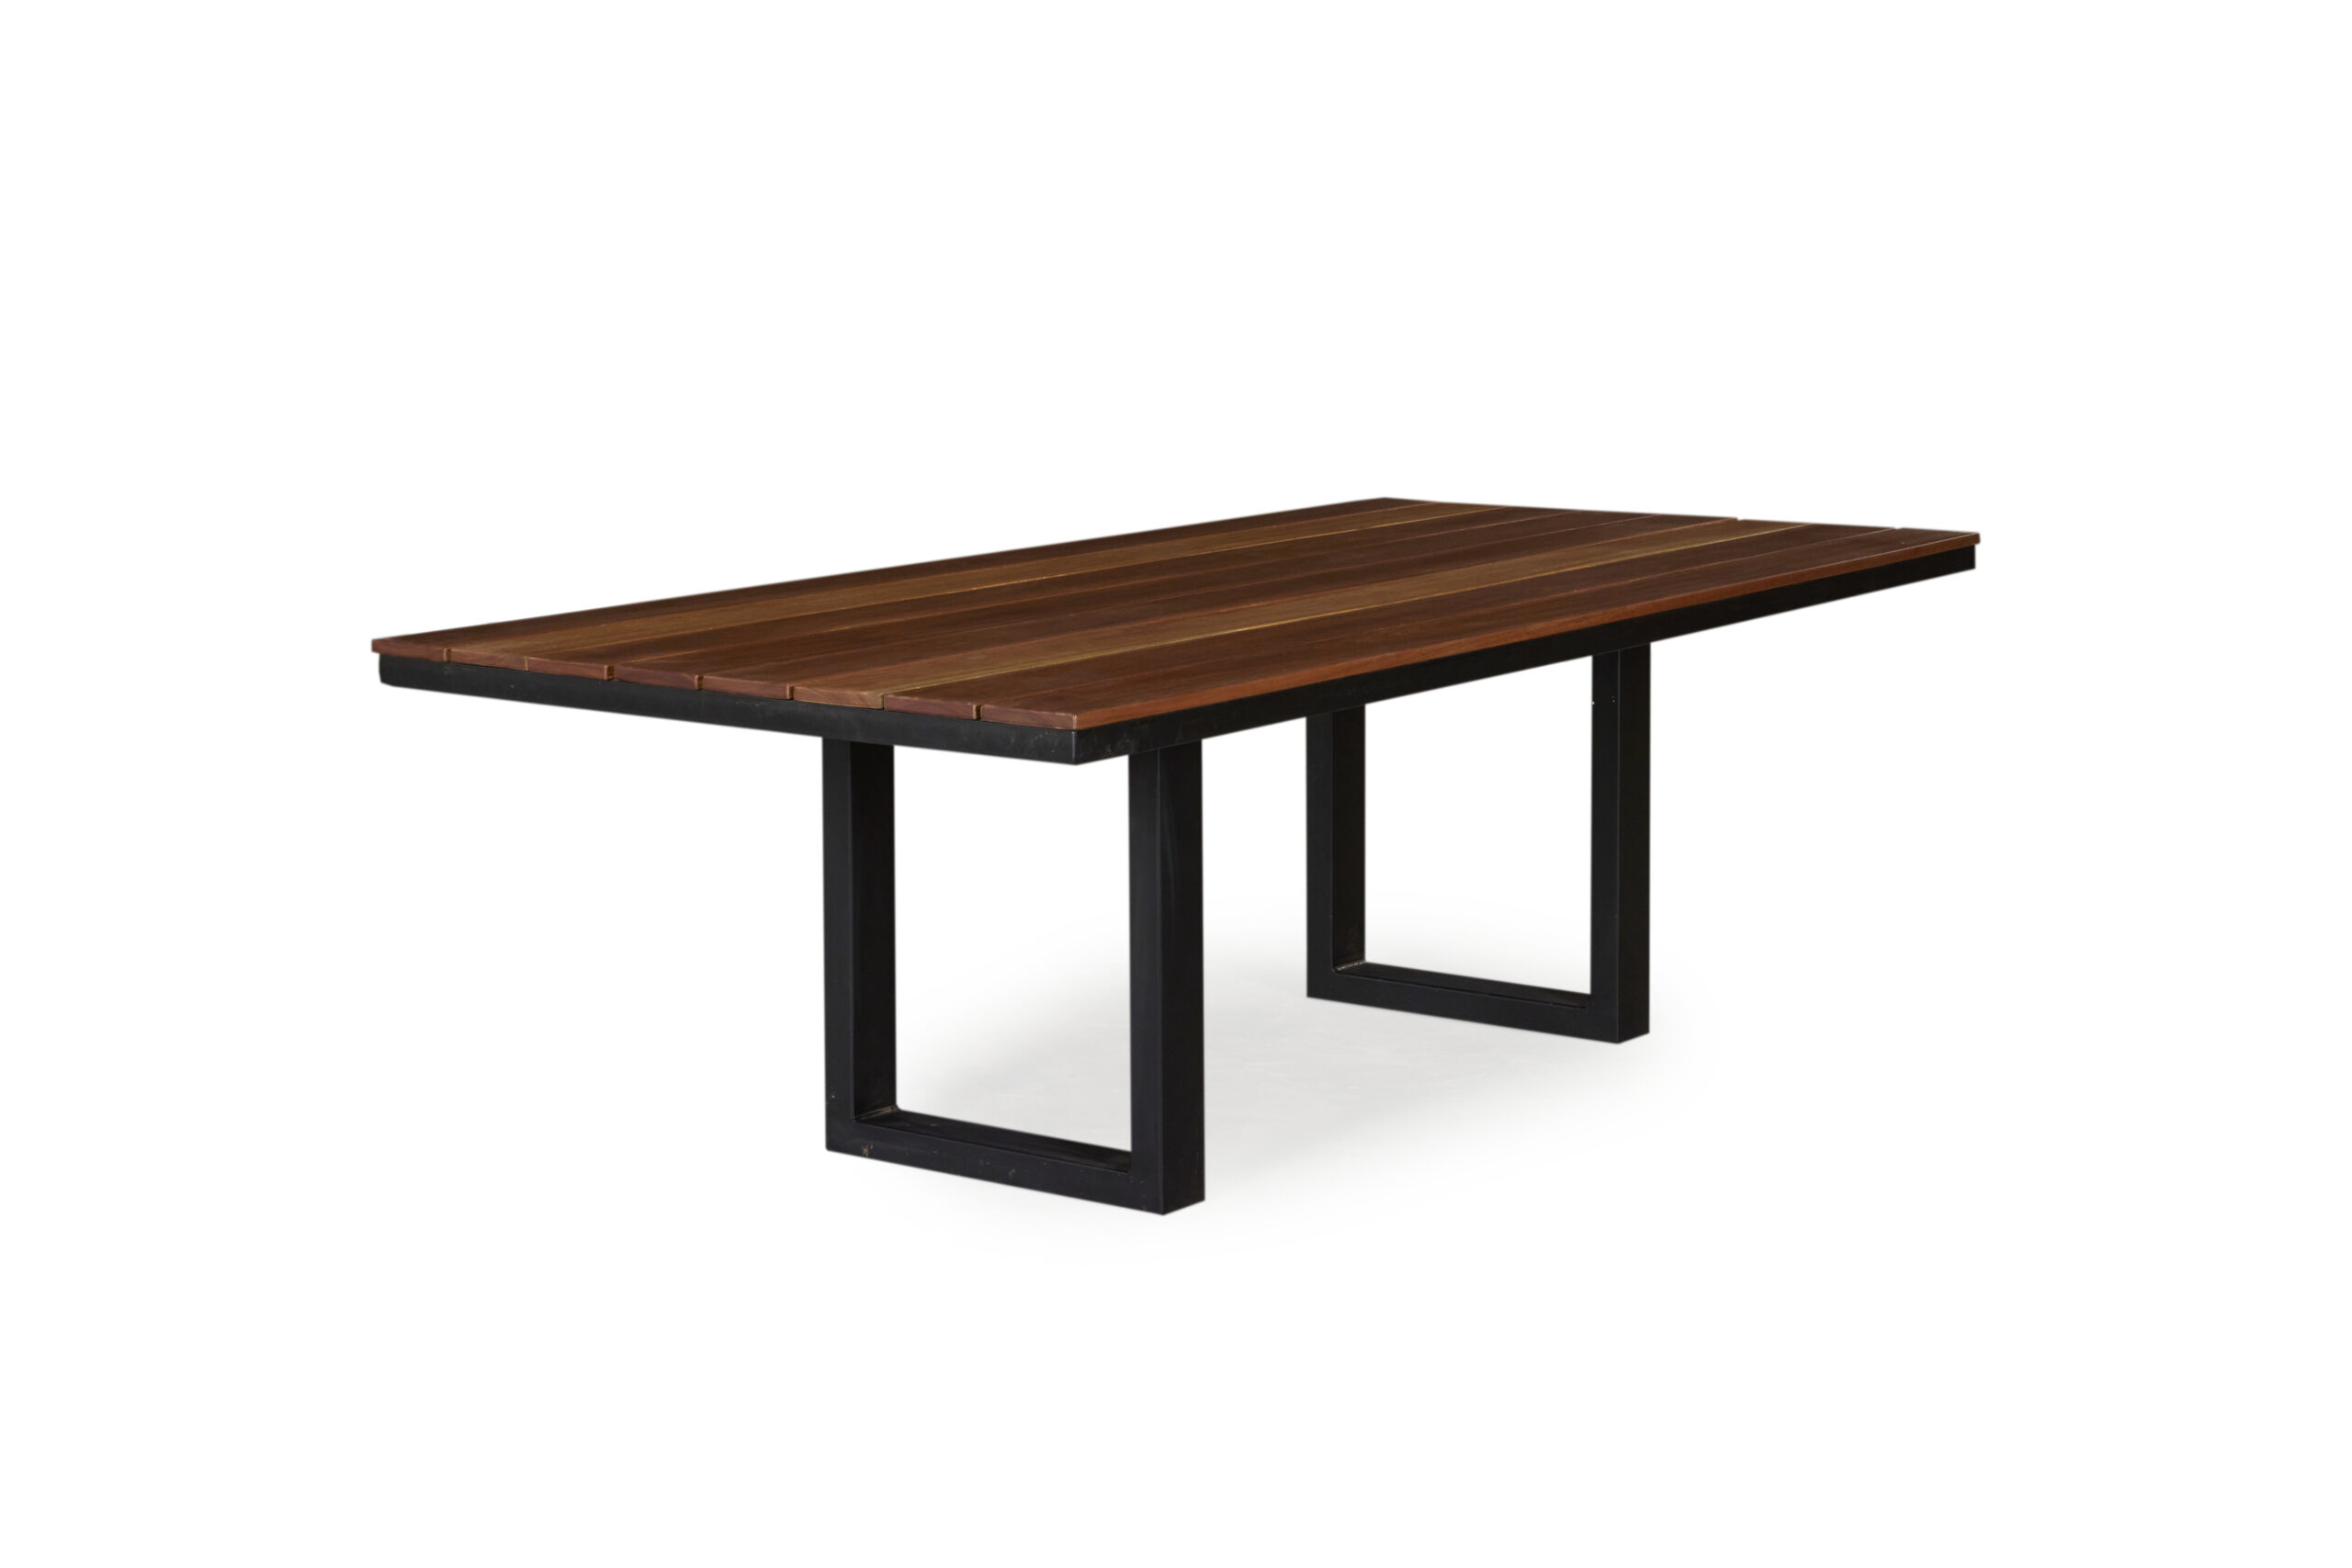 Ascot Outdoor Table: crafted from American Oak timber, dimensions L: 2700mm x W: 1100mm x H: 750mm, custom stain in Brazil, available with U or Klein Steel base." This alt text provides a succinct description of the image and its key details.